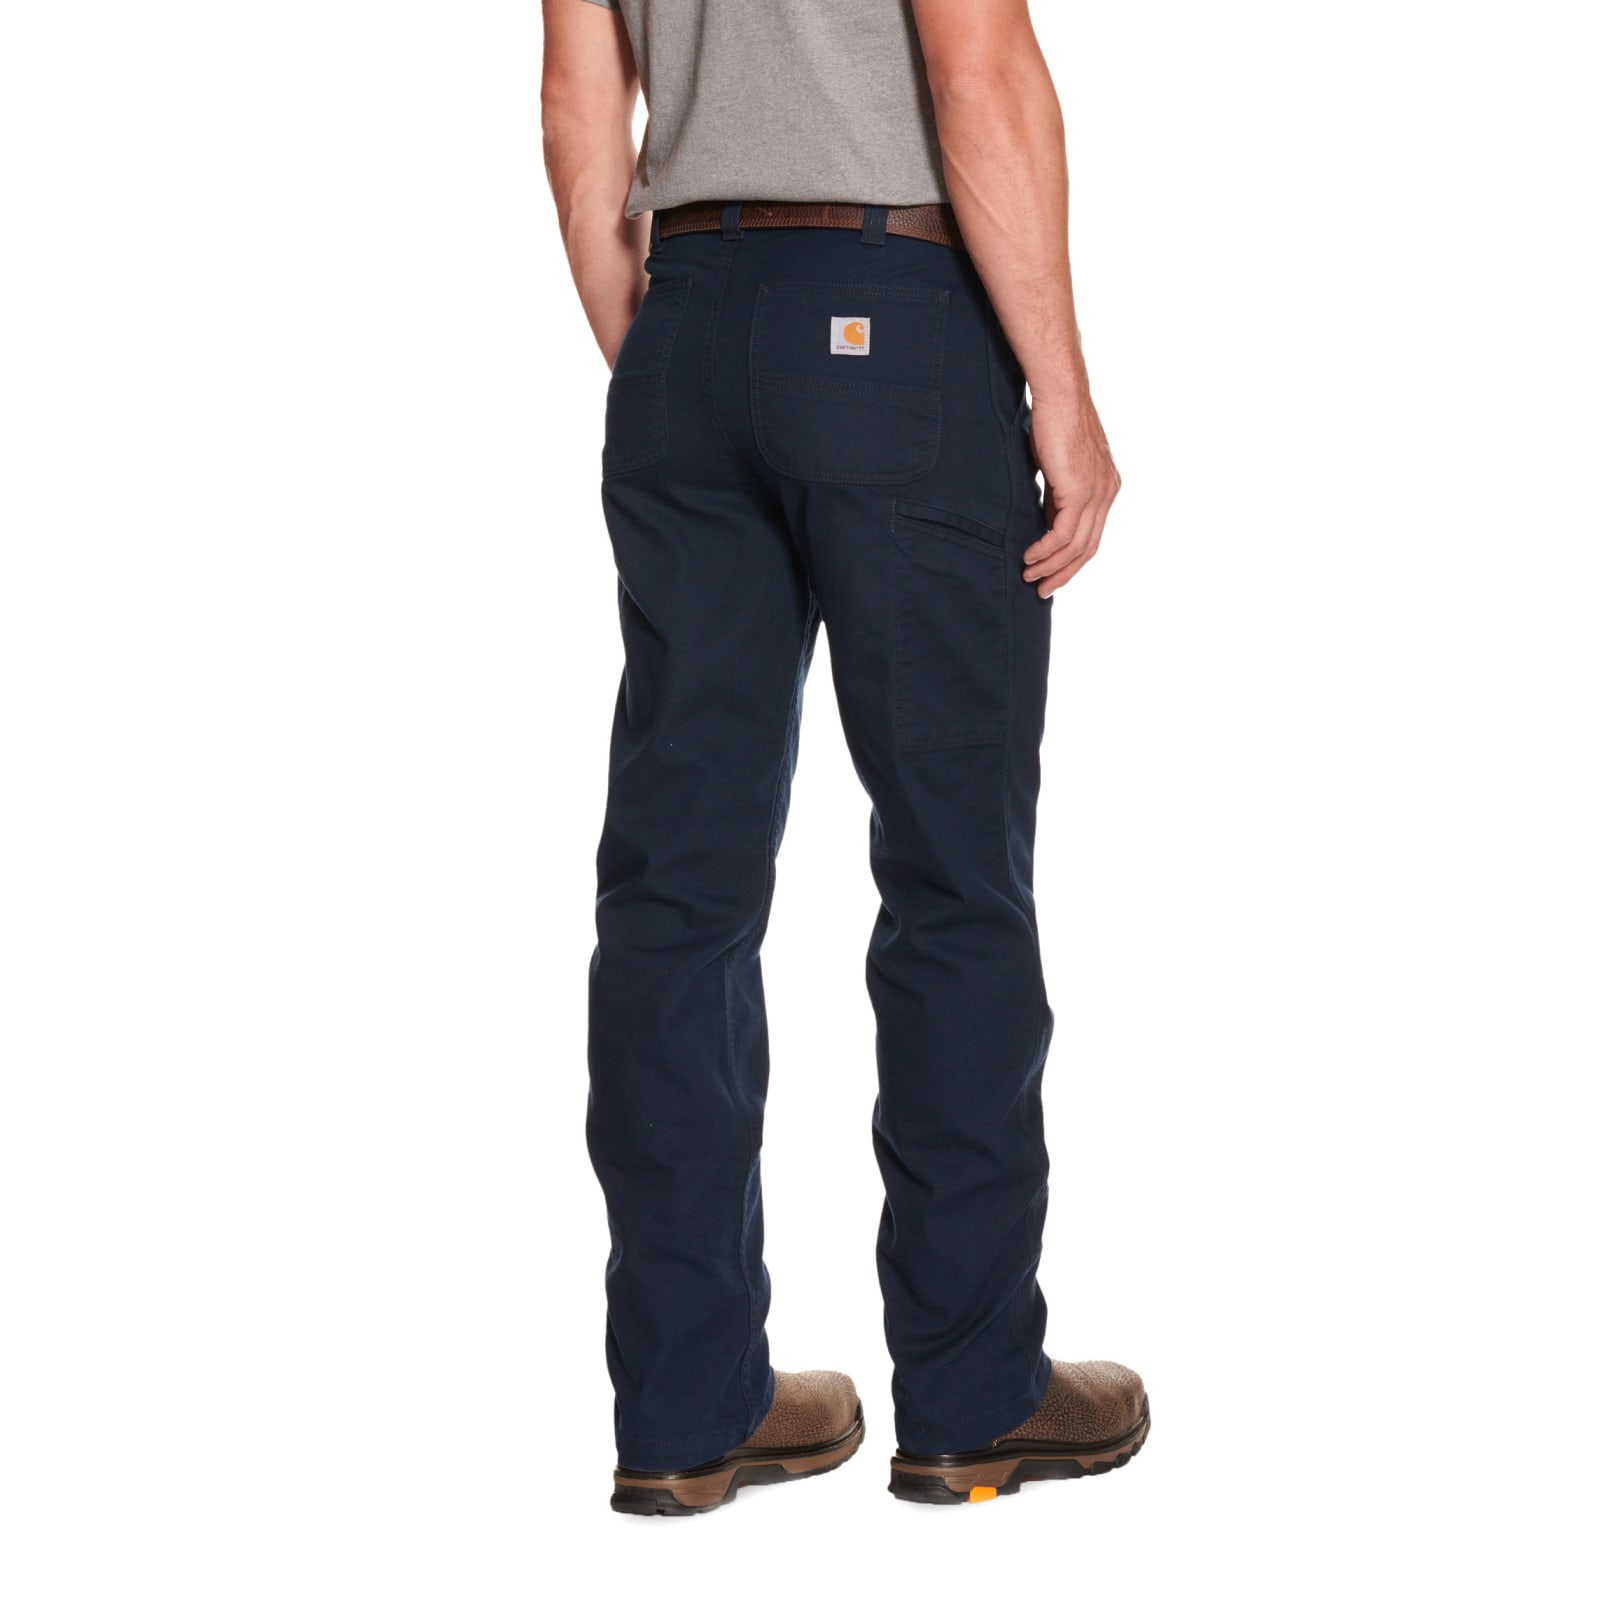 Carhartt Men's Navy Relaxed Fit Straight Leg Flex Canvas Work Pants available at Cavenders